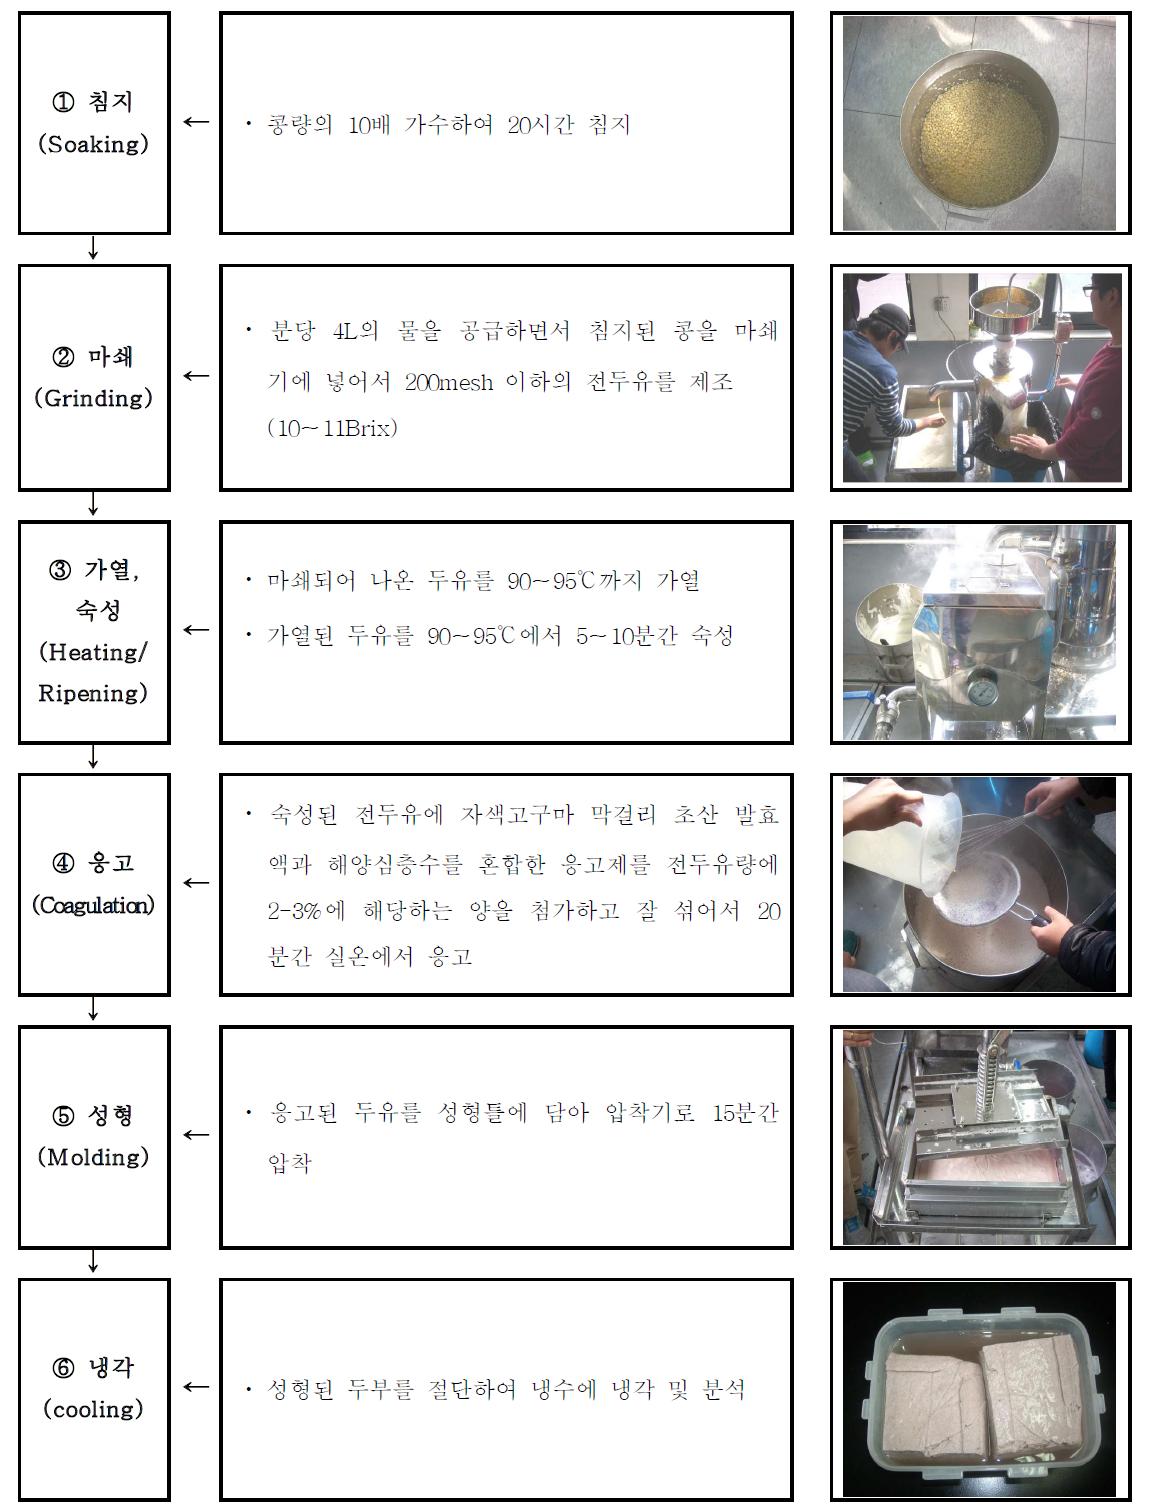 The procedure for preparation of soybean curd